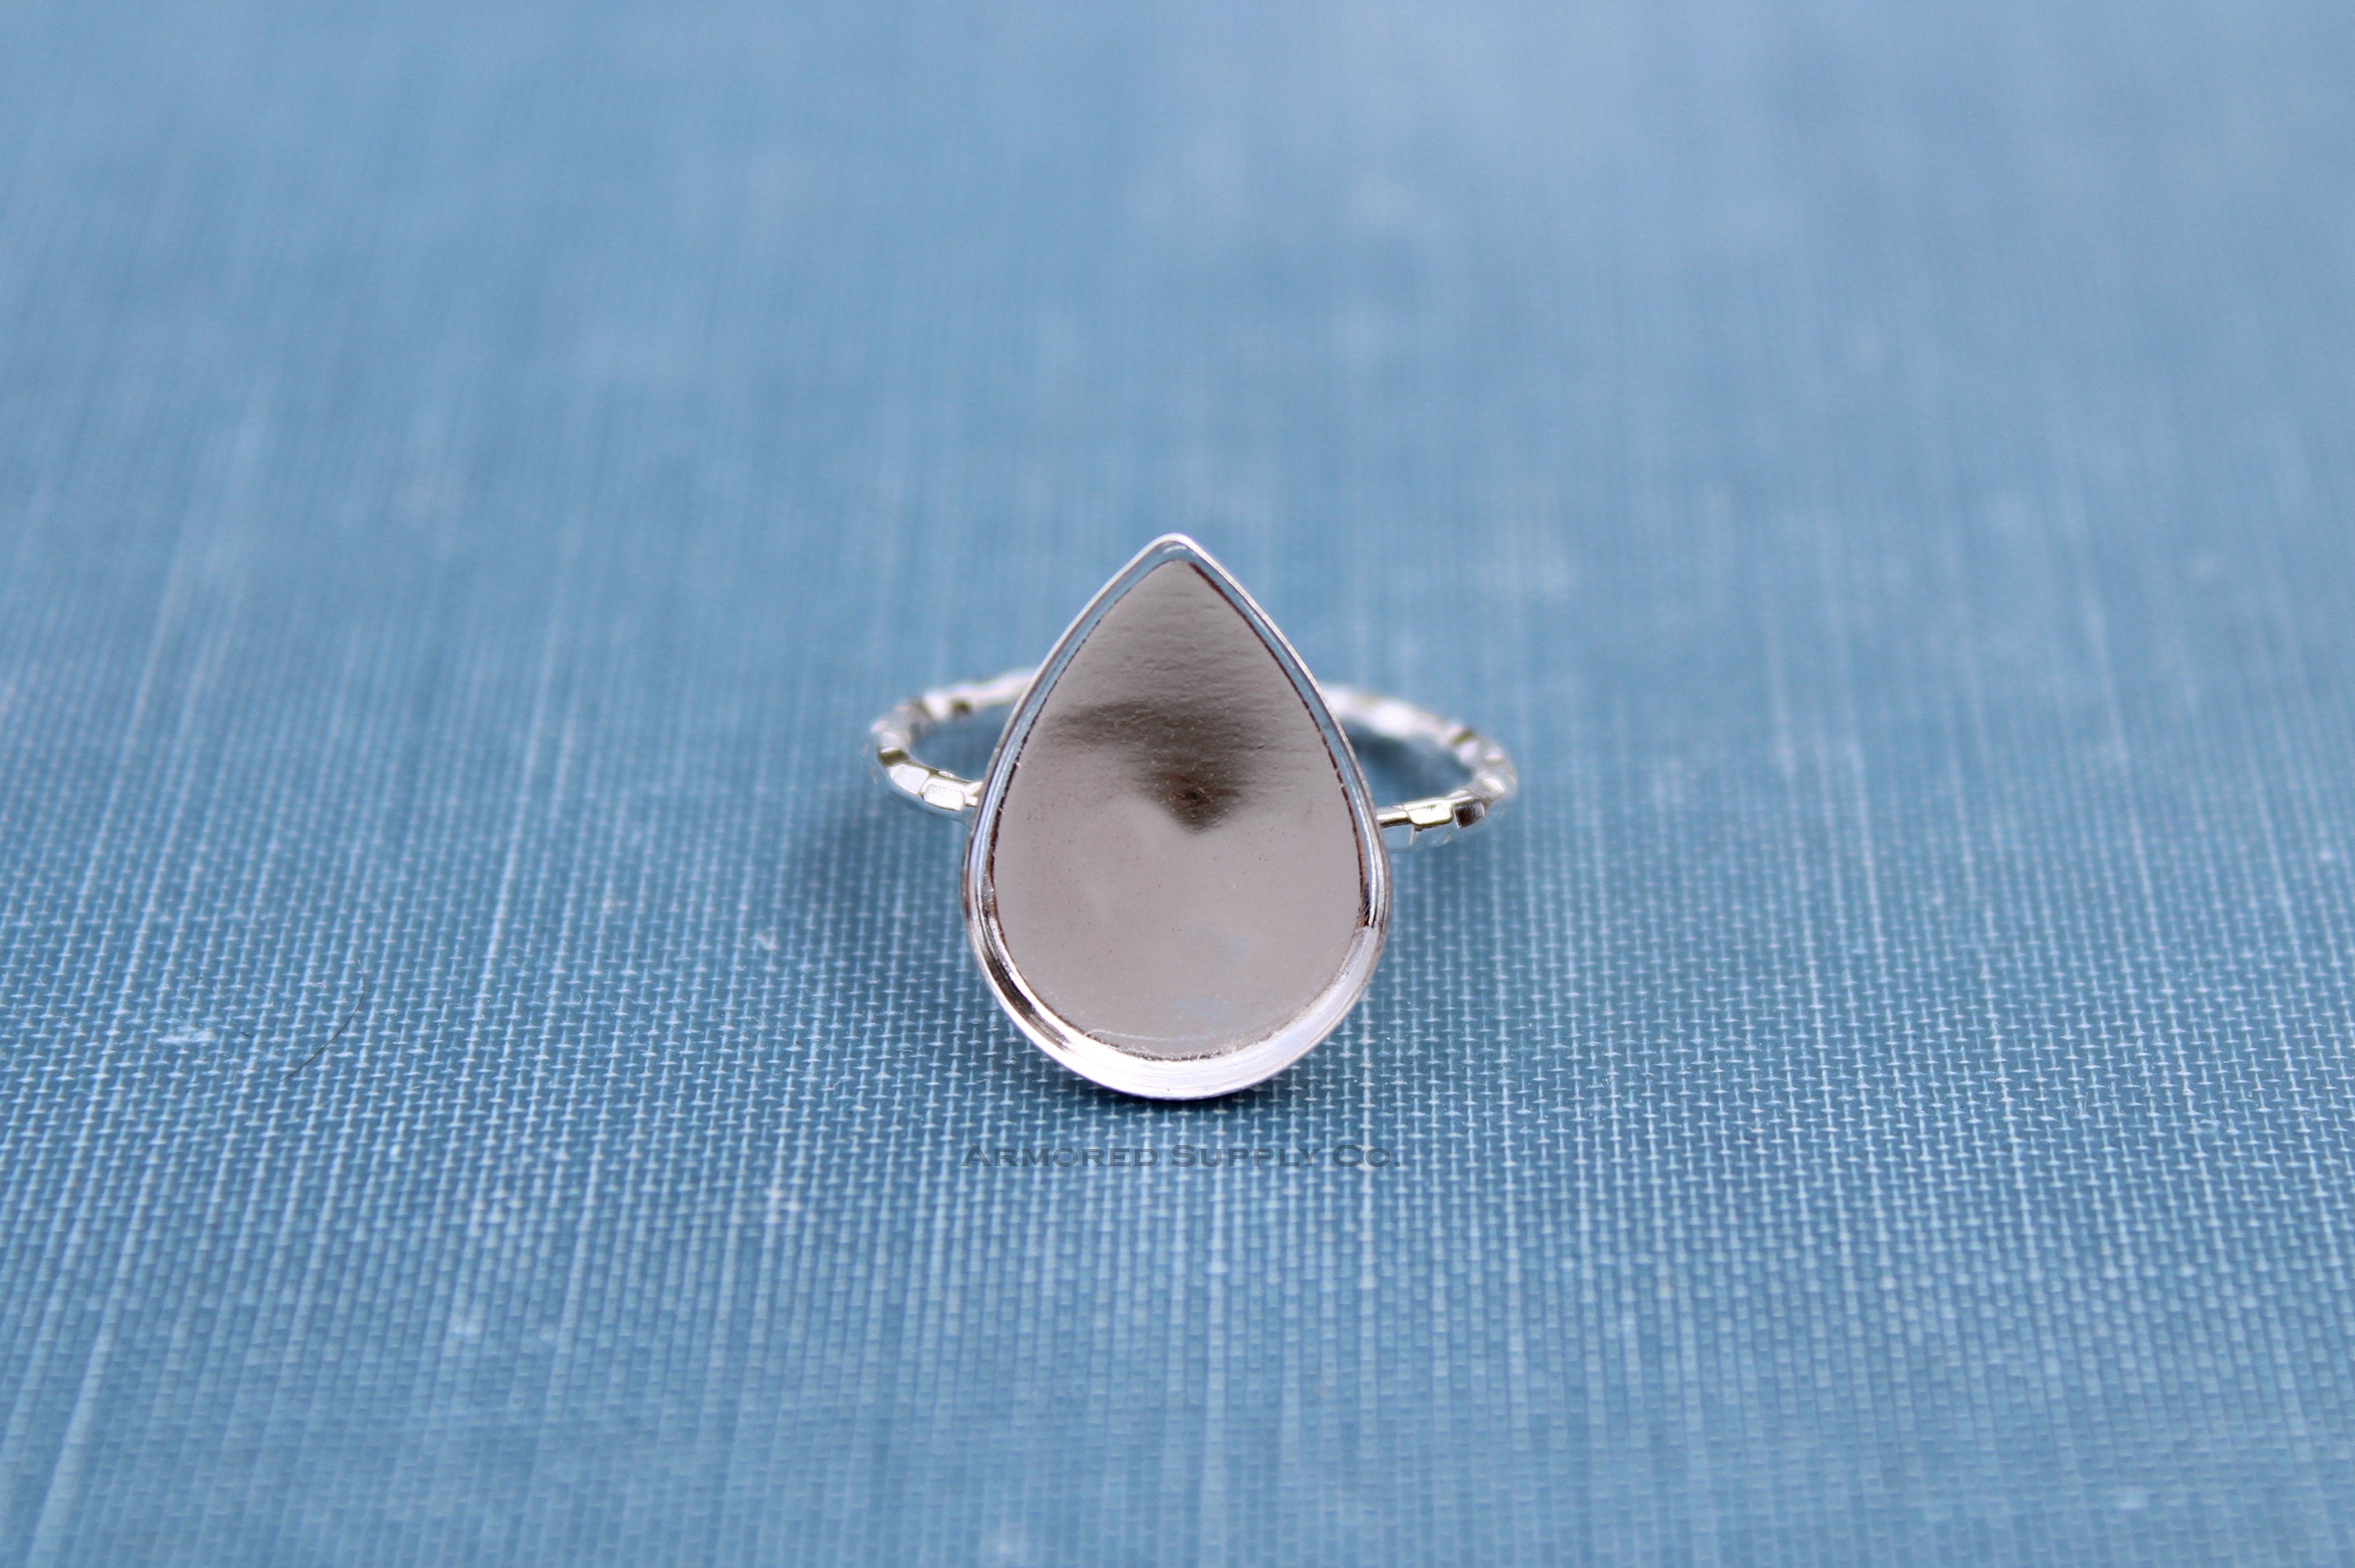 Silver Pear Shaped Bezel Cup Ring blank, Tear Drop Cabochon Bezel, Cab Pad Breast Milk, jewelry supplies, build your ring, wholesale jewelry